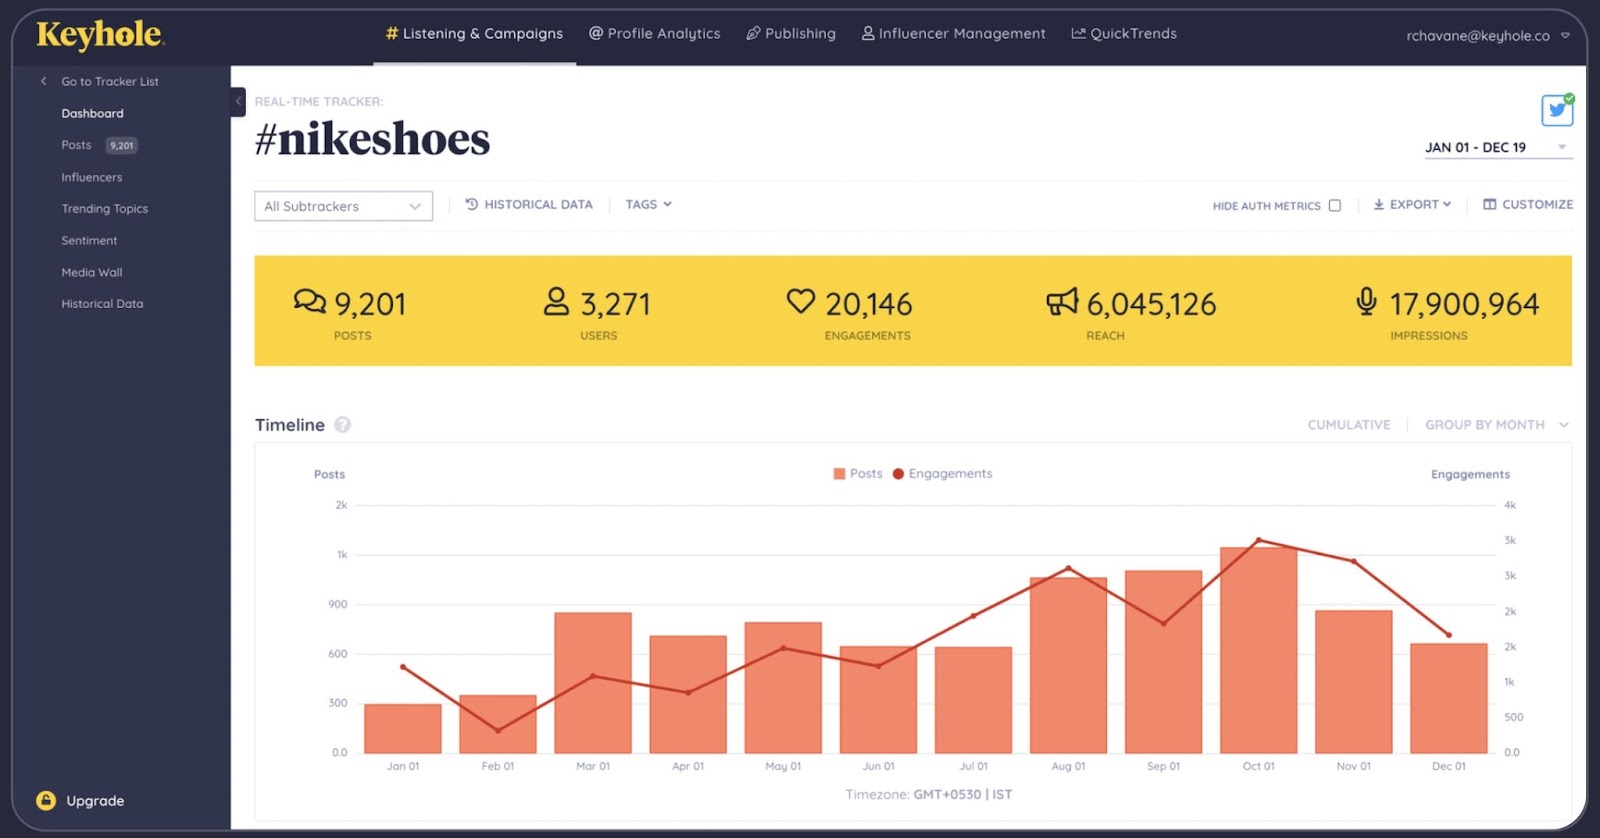 Keyhole's social listening dashboard showing posts, impressions, reach and engagement for a branded search term.